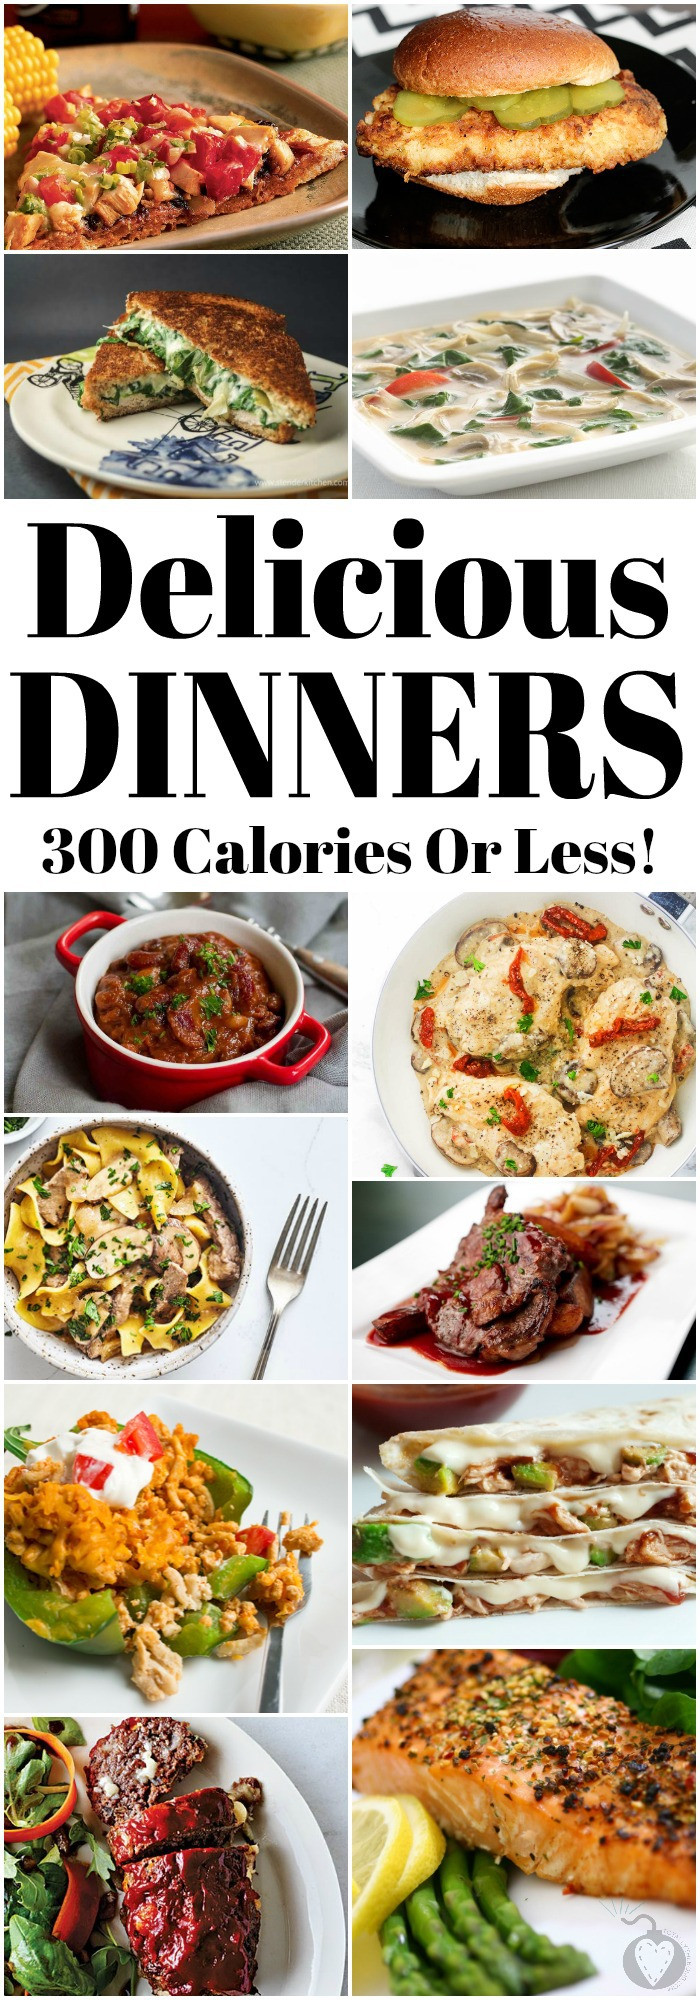 300 Calorie Dinner
 300 Calorie Less Dinners To Kick f The New You